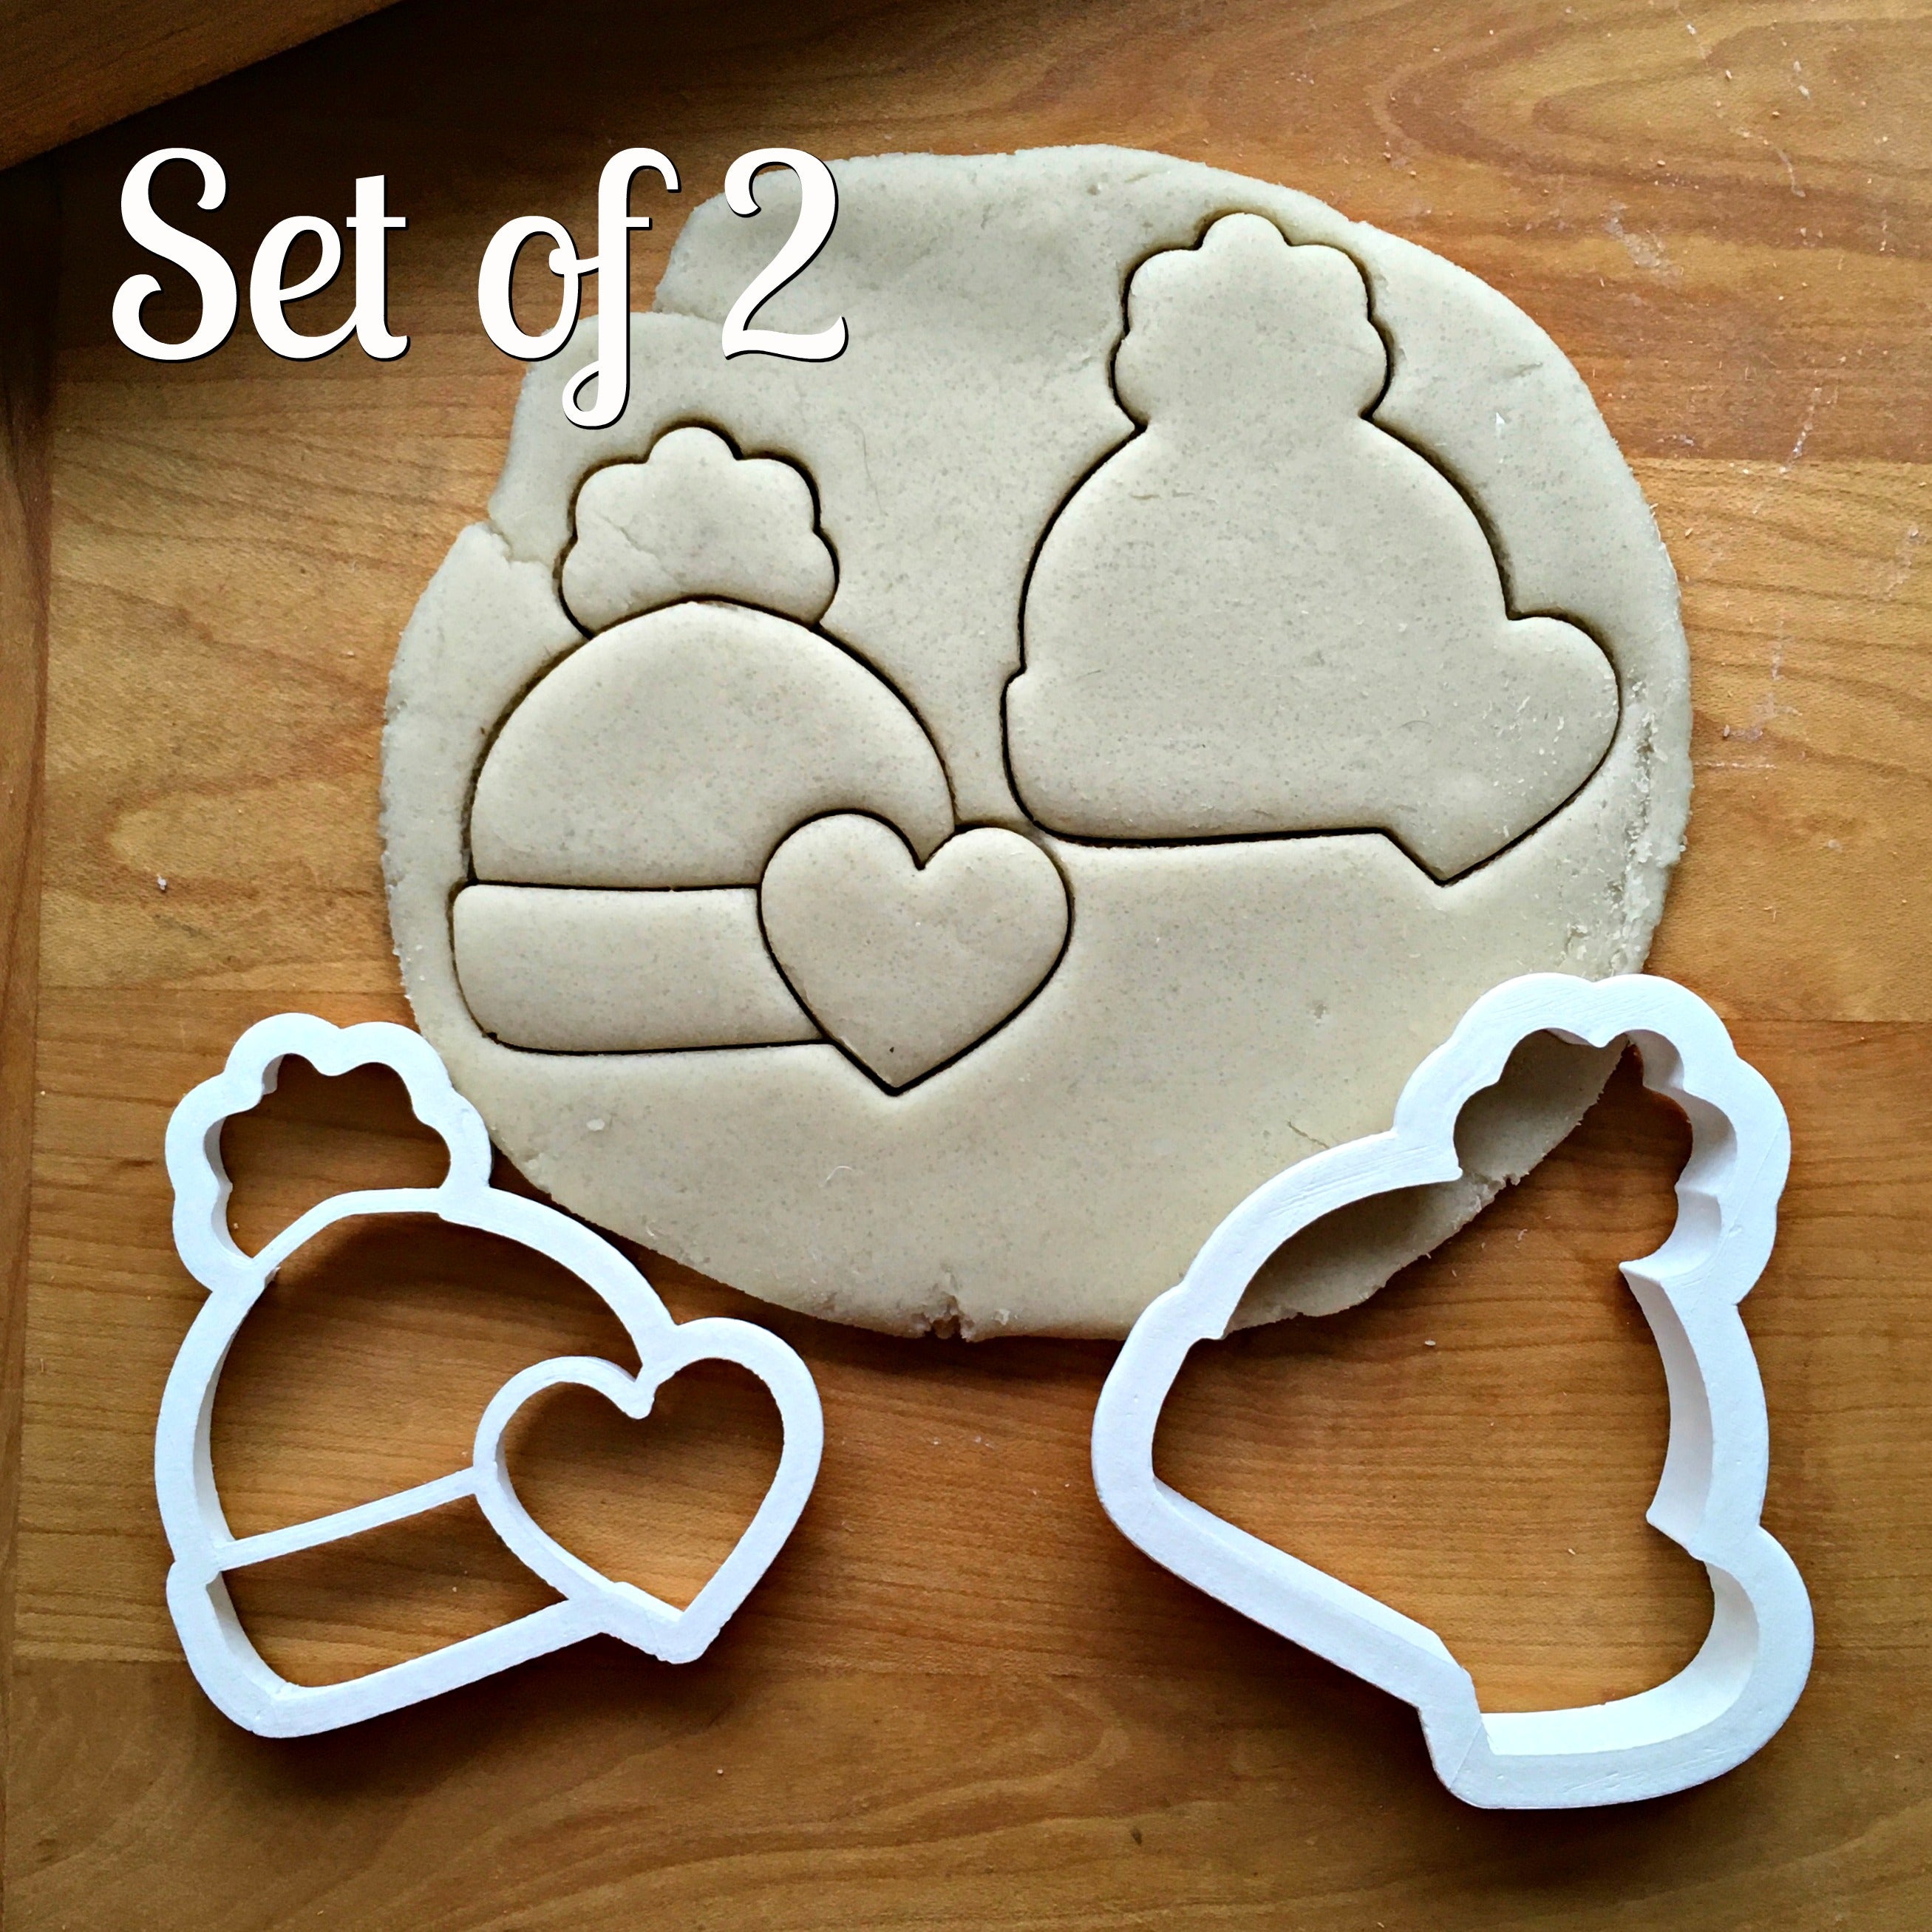 Set of 2 Winter Hat with Heart Cookie Cutters/Dishwasher Safe